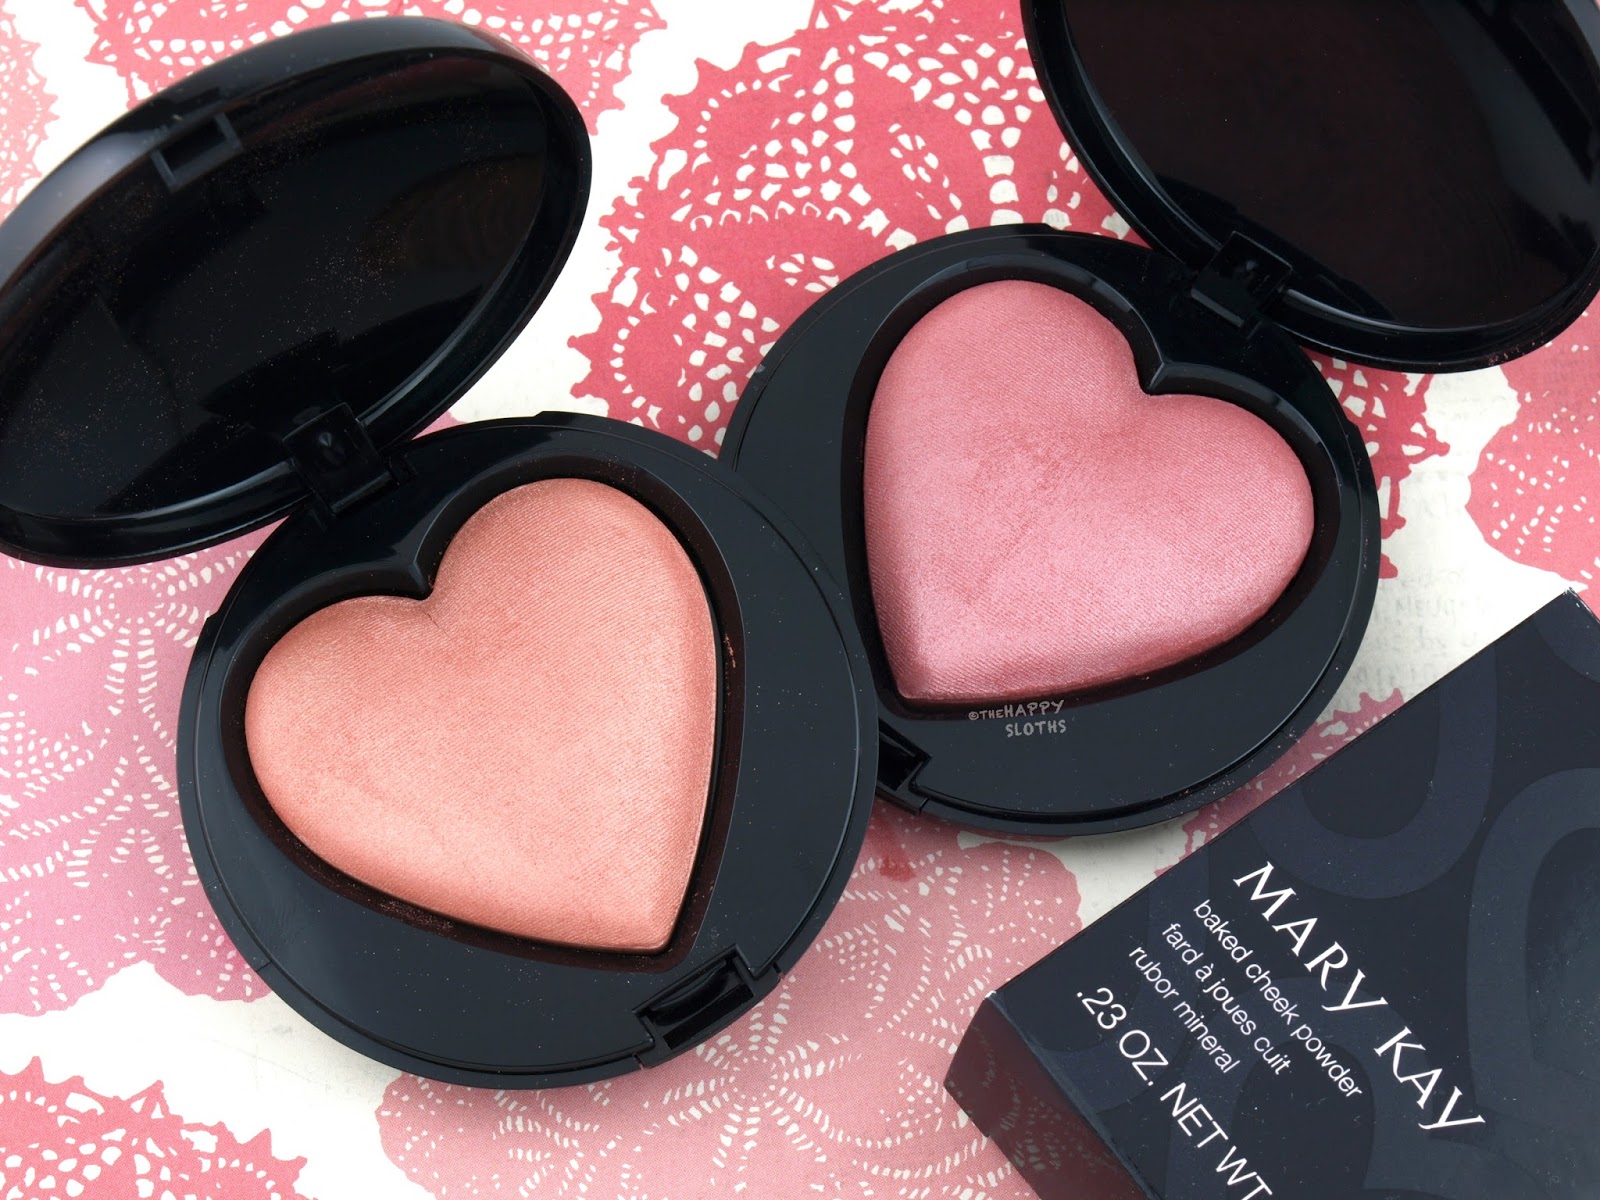 Mary Kay Summer 2017 Baked Cheek Powder: Review and Swatches